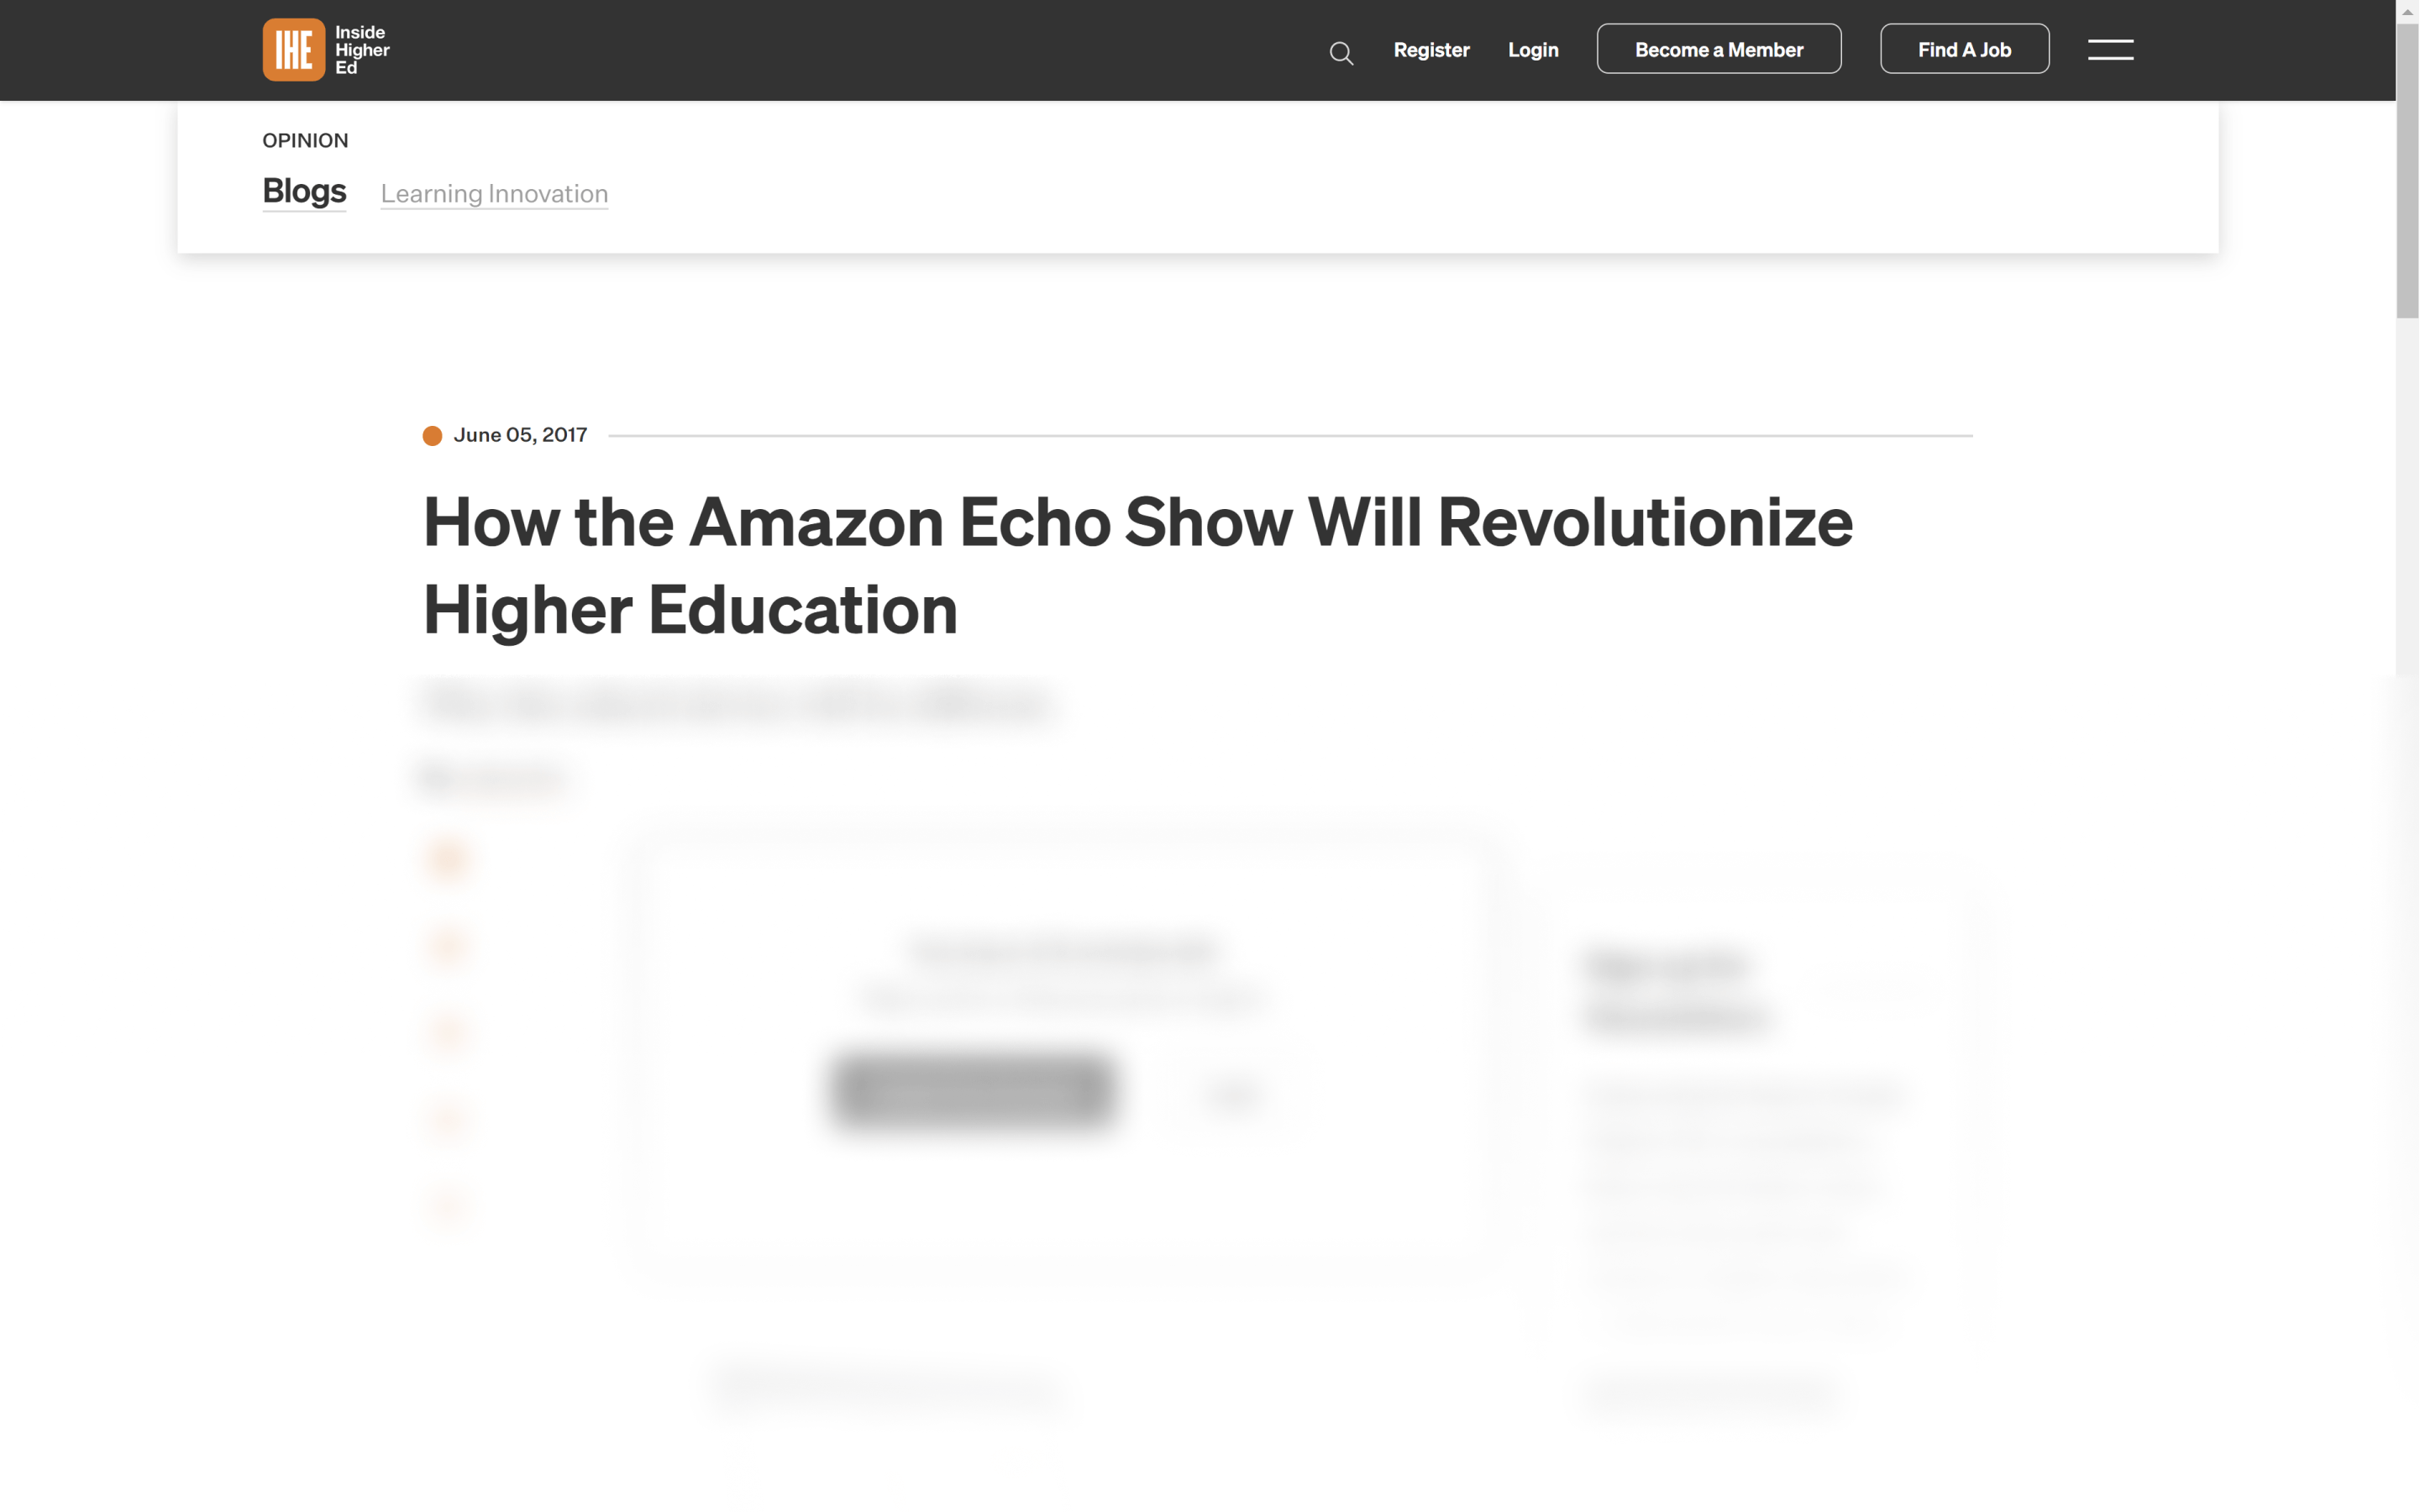 How the Amazon Echo Show will Revolutionize higher education